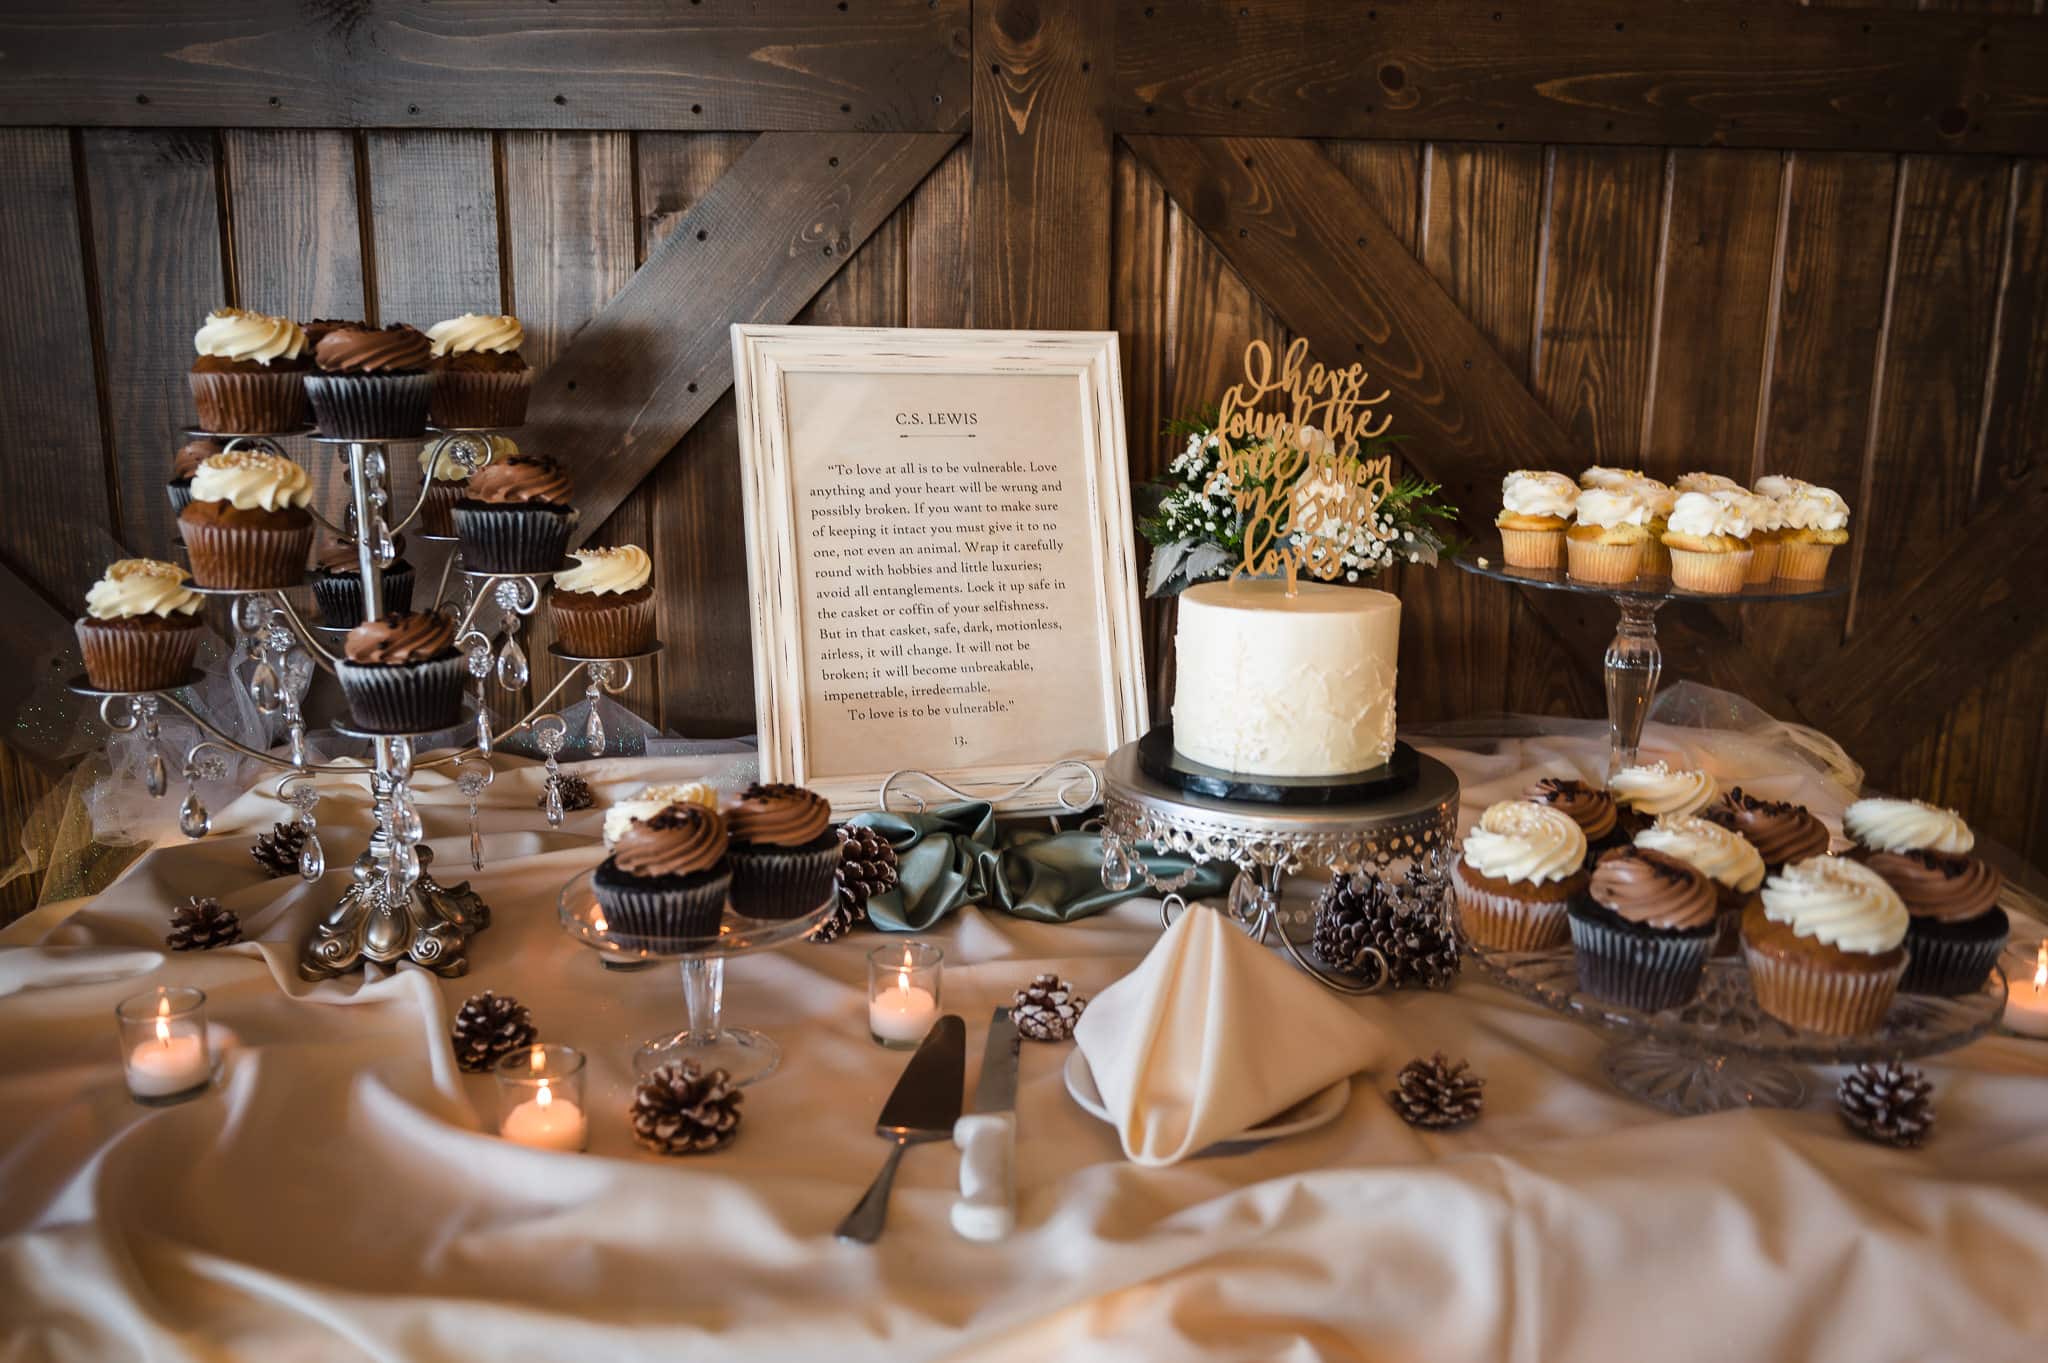 Dessert table with miniature white wedding cake, fudge and vanilla-topped cupcakes features a quote from CS Lewis about love.